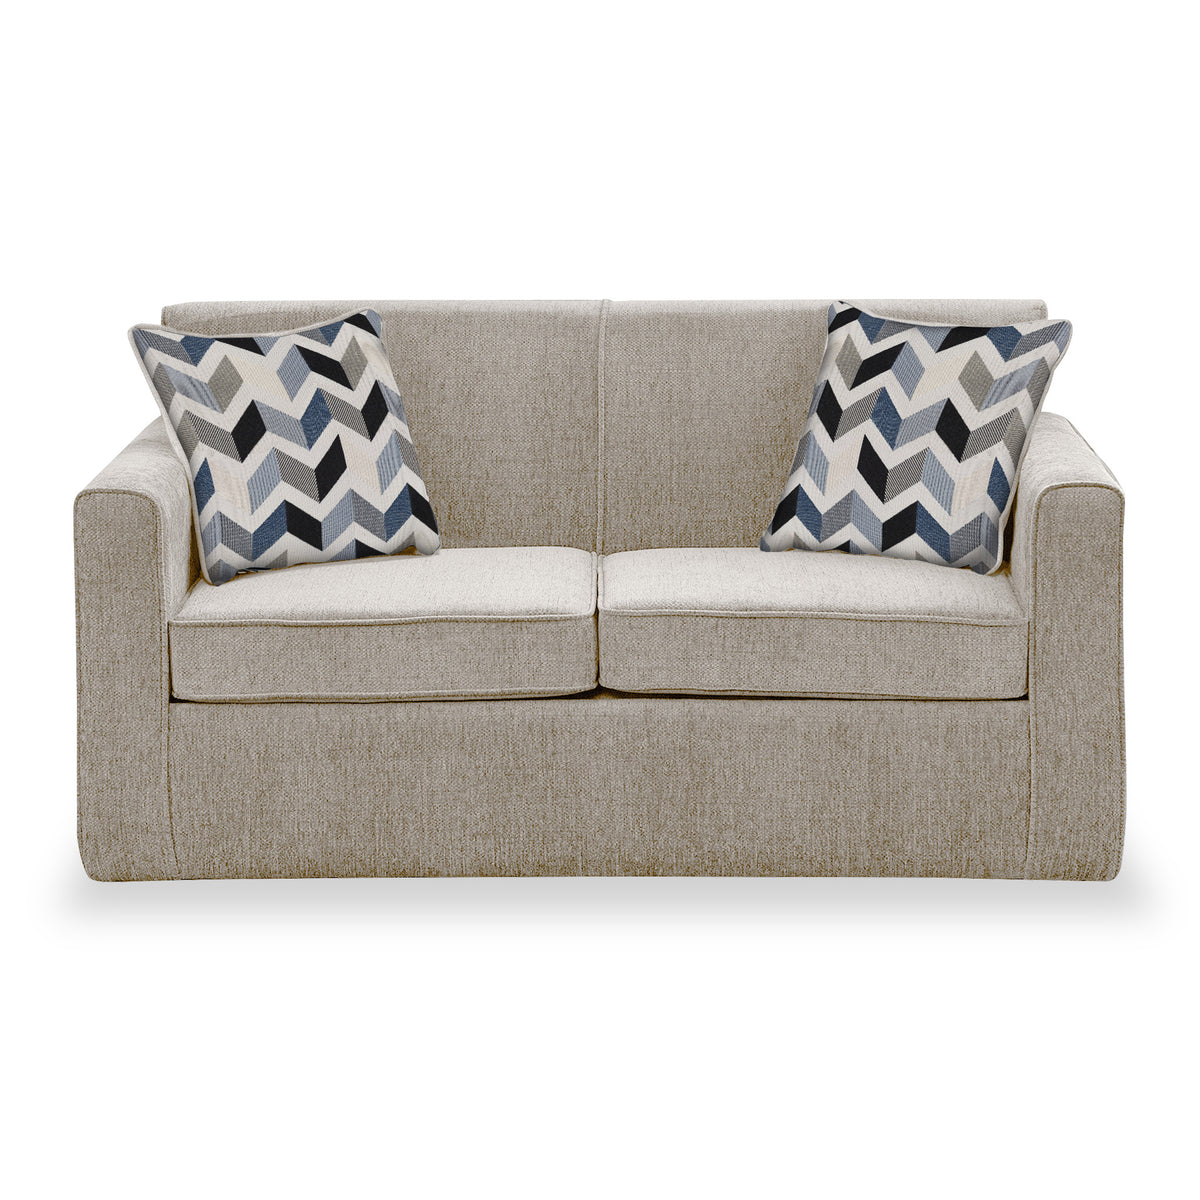 Welton Oatmeal Soft Weave 2 Seater Sofa Bed with Morelisa Denim